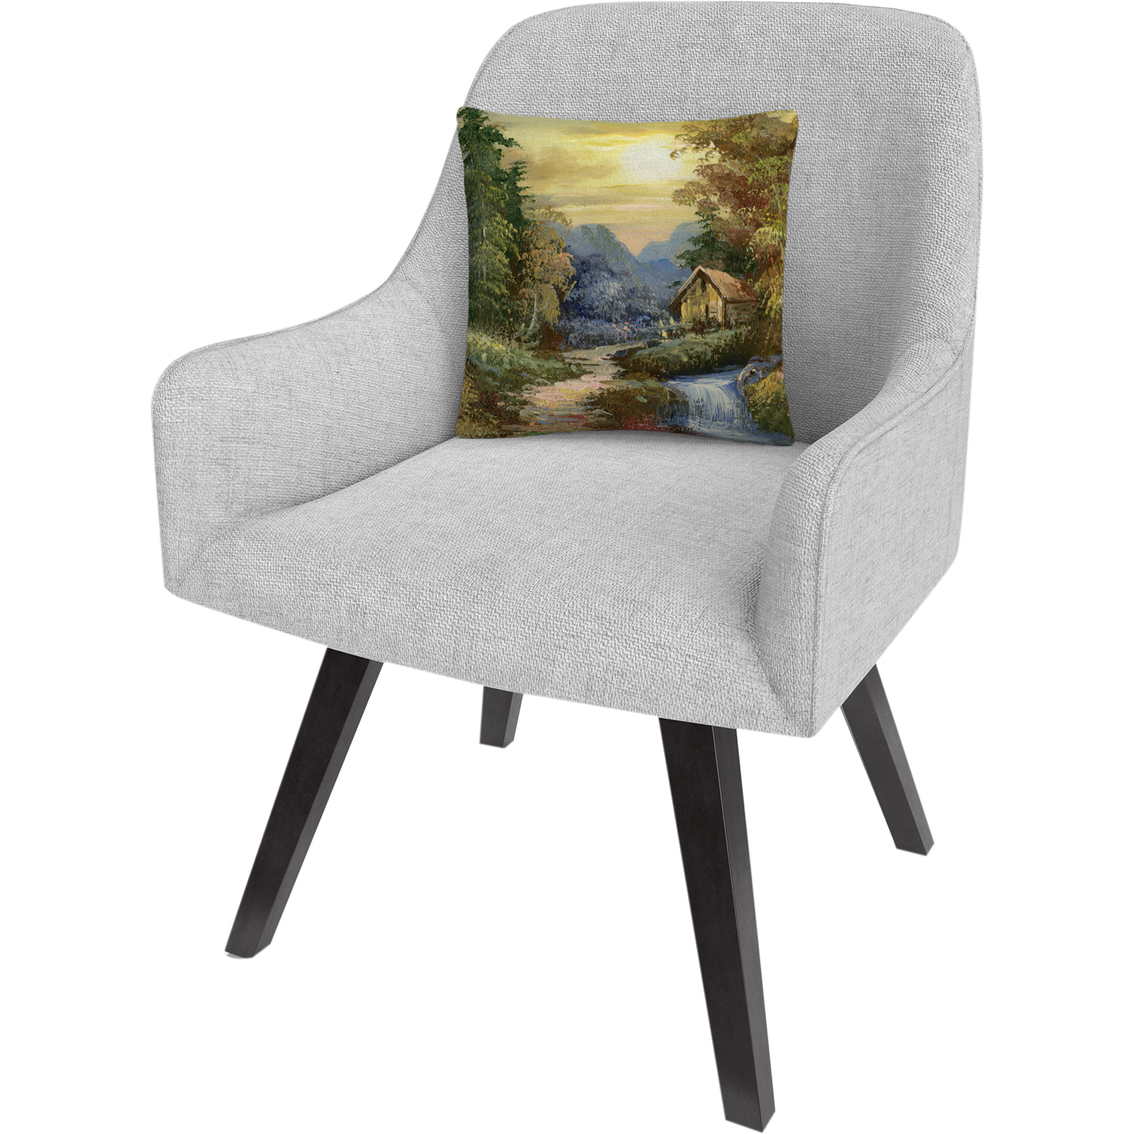 Trademark Fine Art Tranquility Rustic Landscape Decorative Throw Pillow - Image 2 of 2